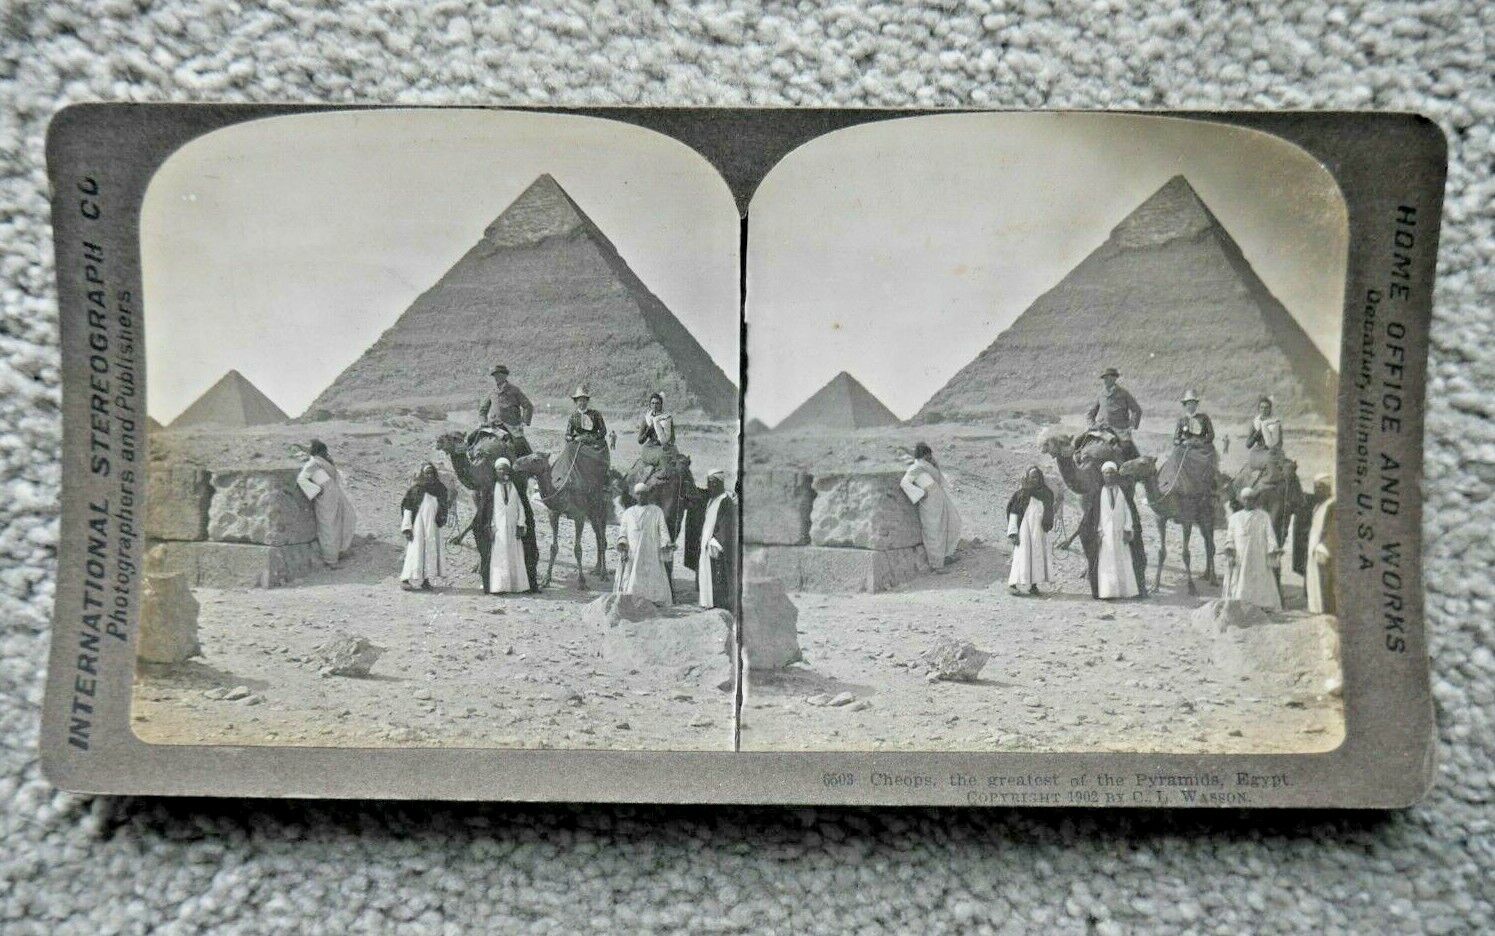 ANTIQUE STEREOVIEW PHOTO CARD 6503 CHEOPS GREATEST PYRAMID EGYPT 1902 RARE  J692